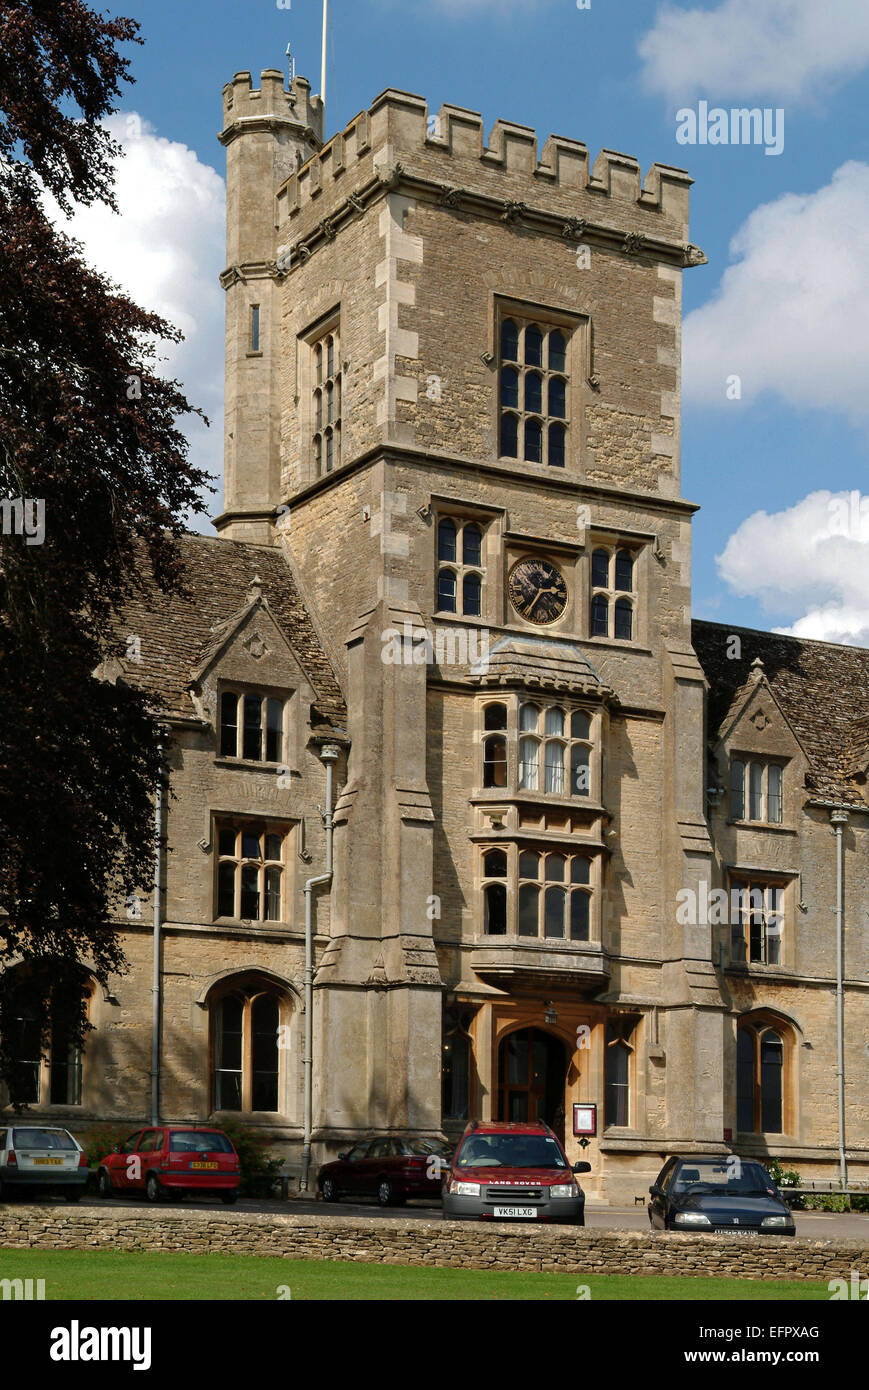 Royal Agricultural University (RAU),formerly the Royal Agricultiral College (RAC),Cirencester,Gloucestershire,UK.farming rural Stock Photo